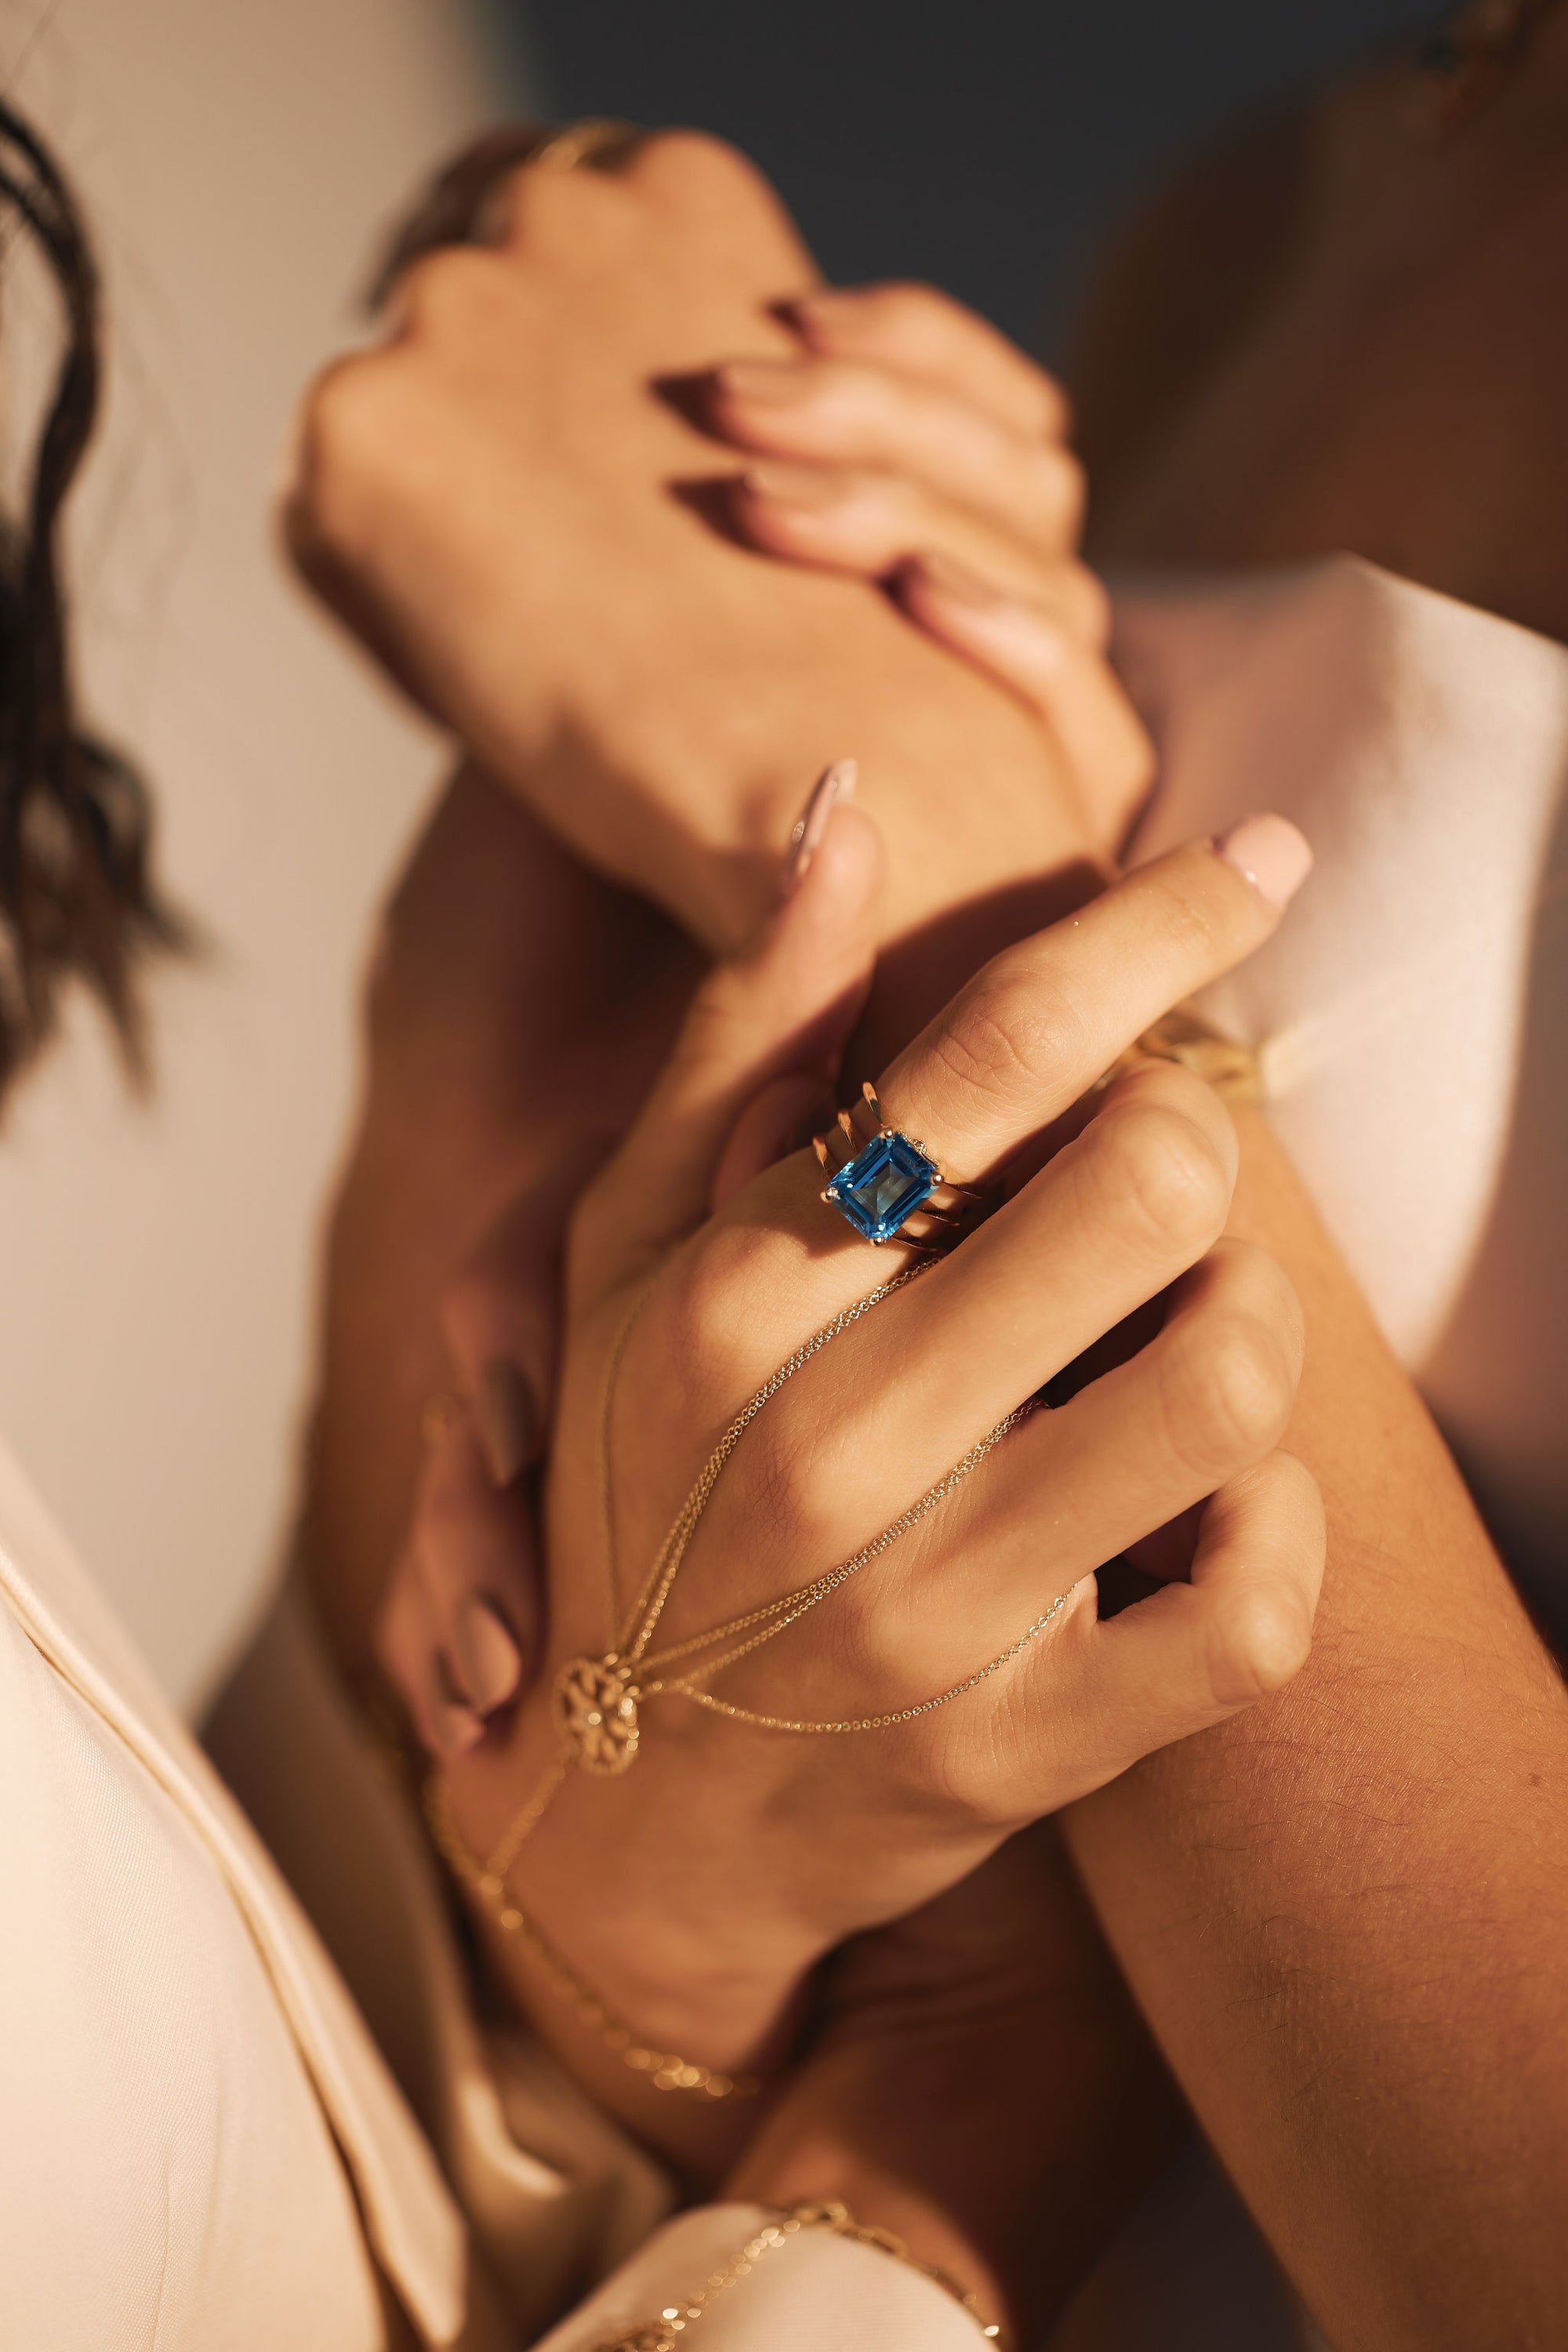 Close-up of intertwined hands, showcasing elegant jewelry. One hand features the stunning Blue Ice - Blue Topaz Triple Band Yellow Gold Ring by Nijma M Fine Jewelry and a delicate 14K yellow gold chain bracelet. The image captures a sense of intimacy and connection, highlighting the beautifully manicured nails and sophisticated accessories adorned with natural diamonds.